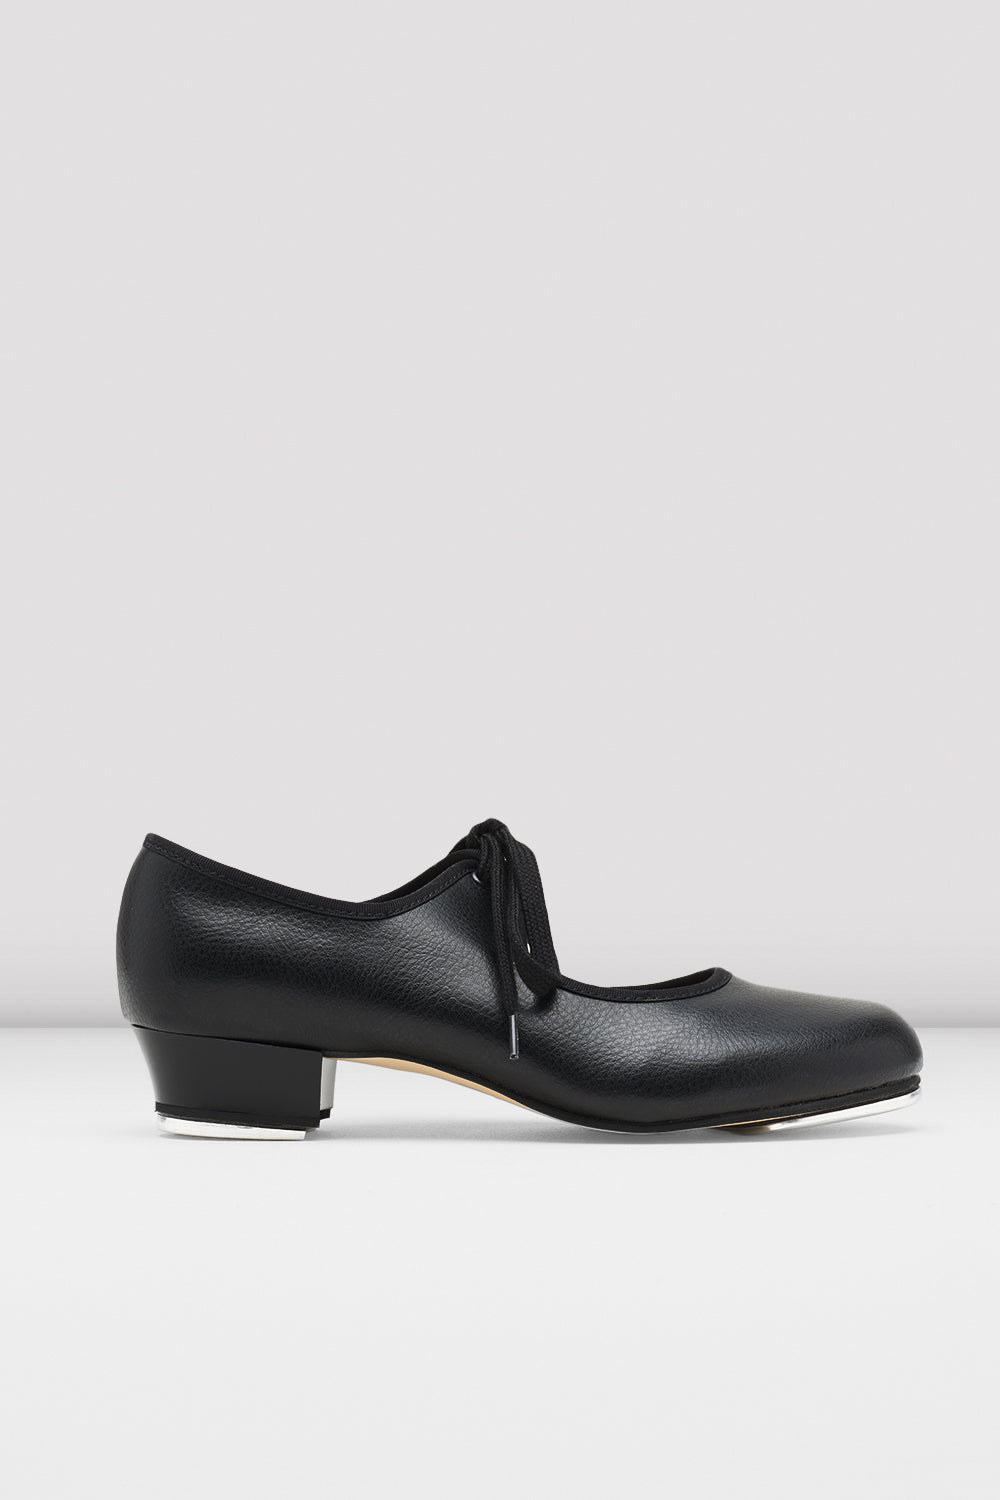 BLOCH Ladies Timestep Tap Shoe, Black Synthetic Leather